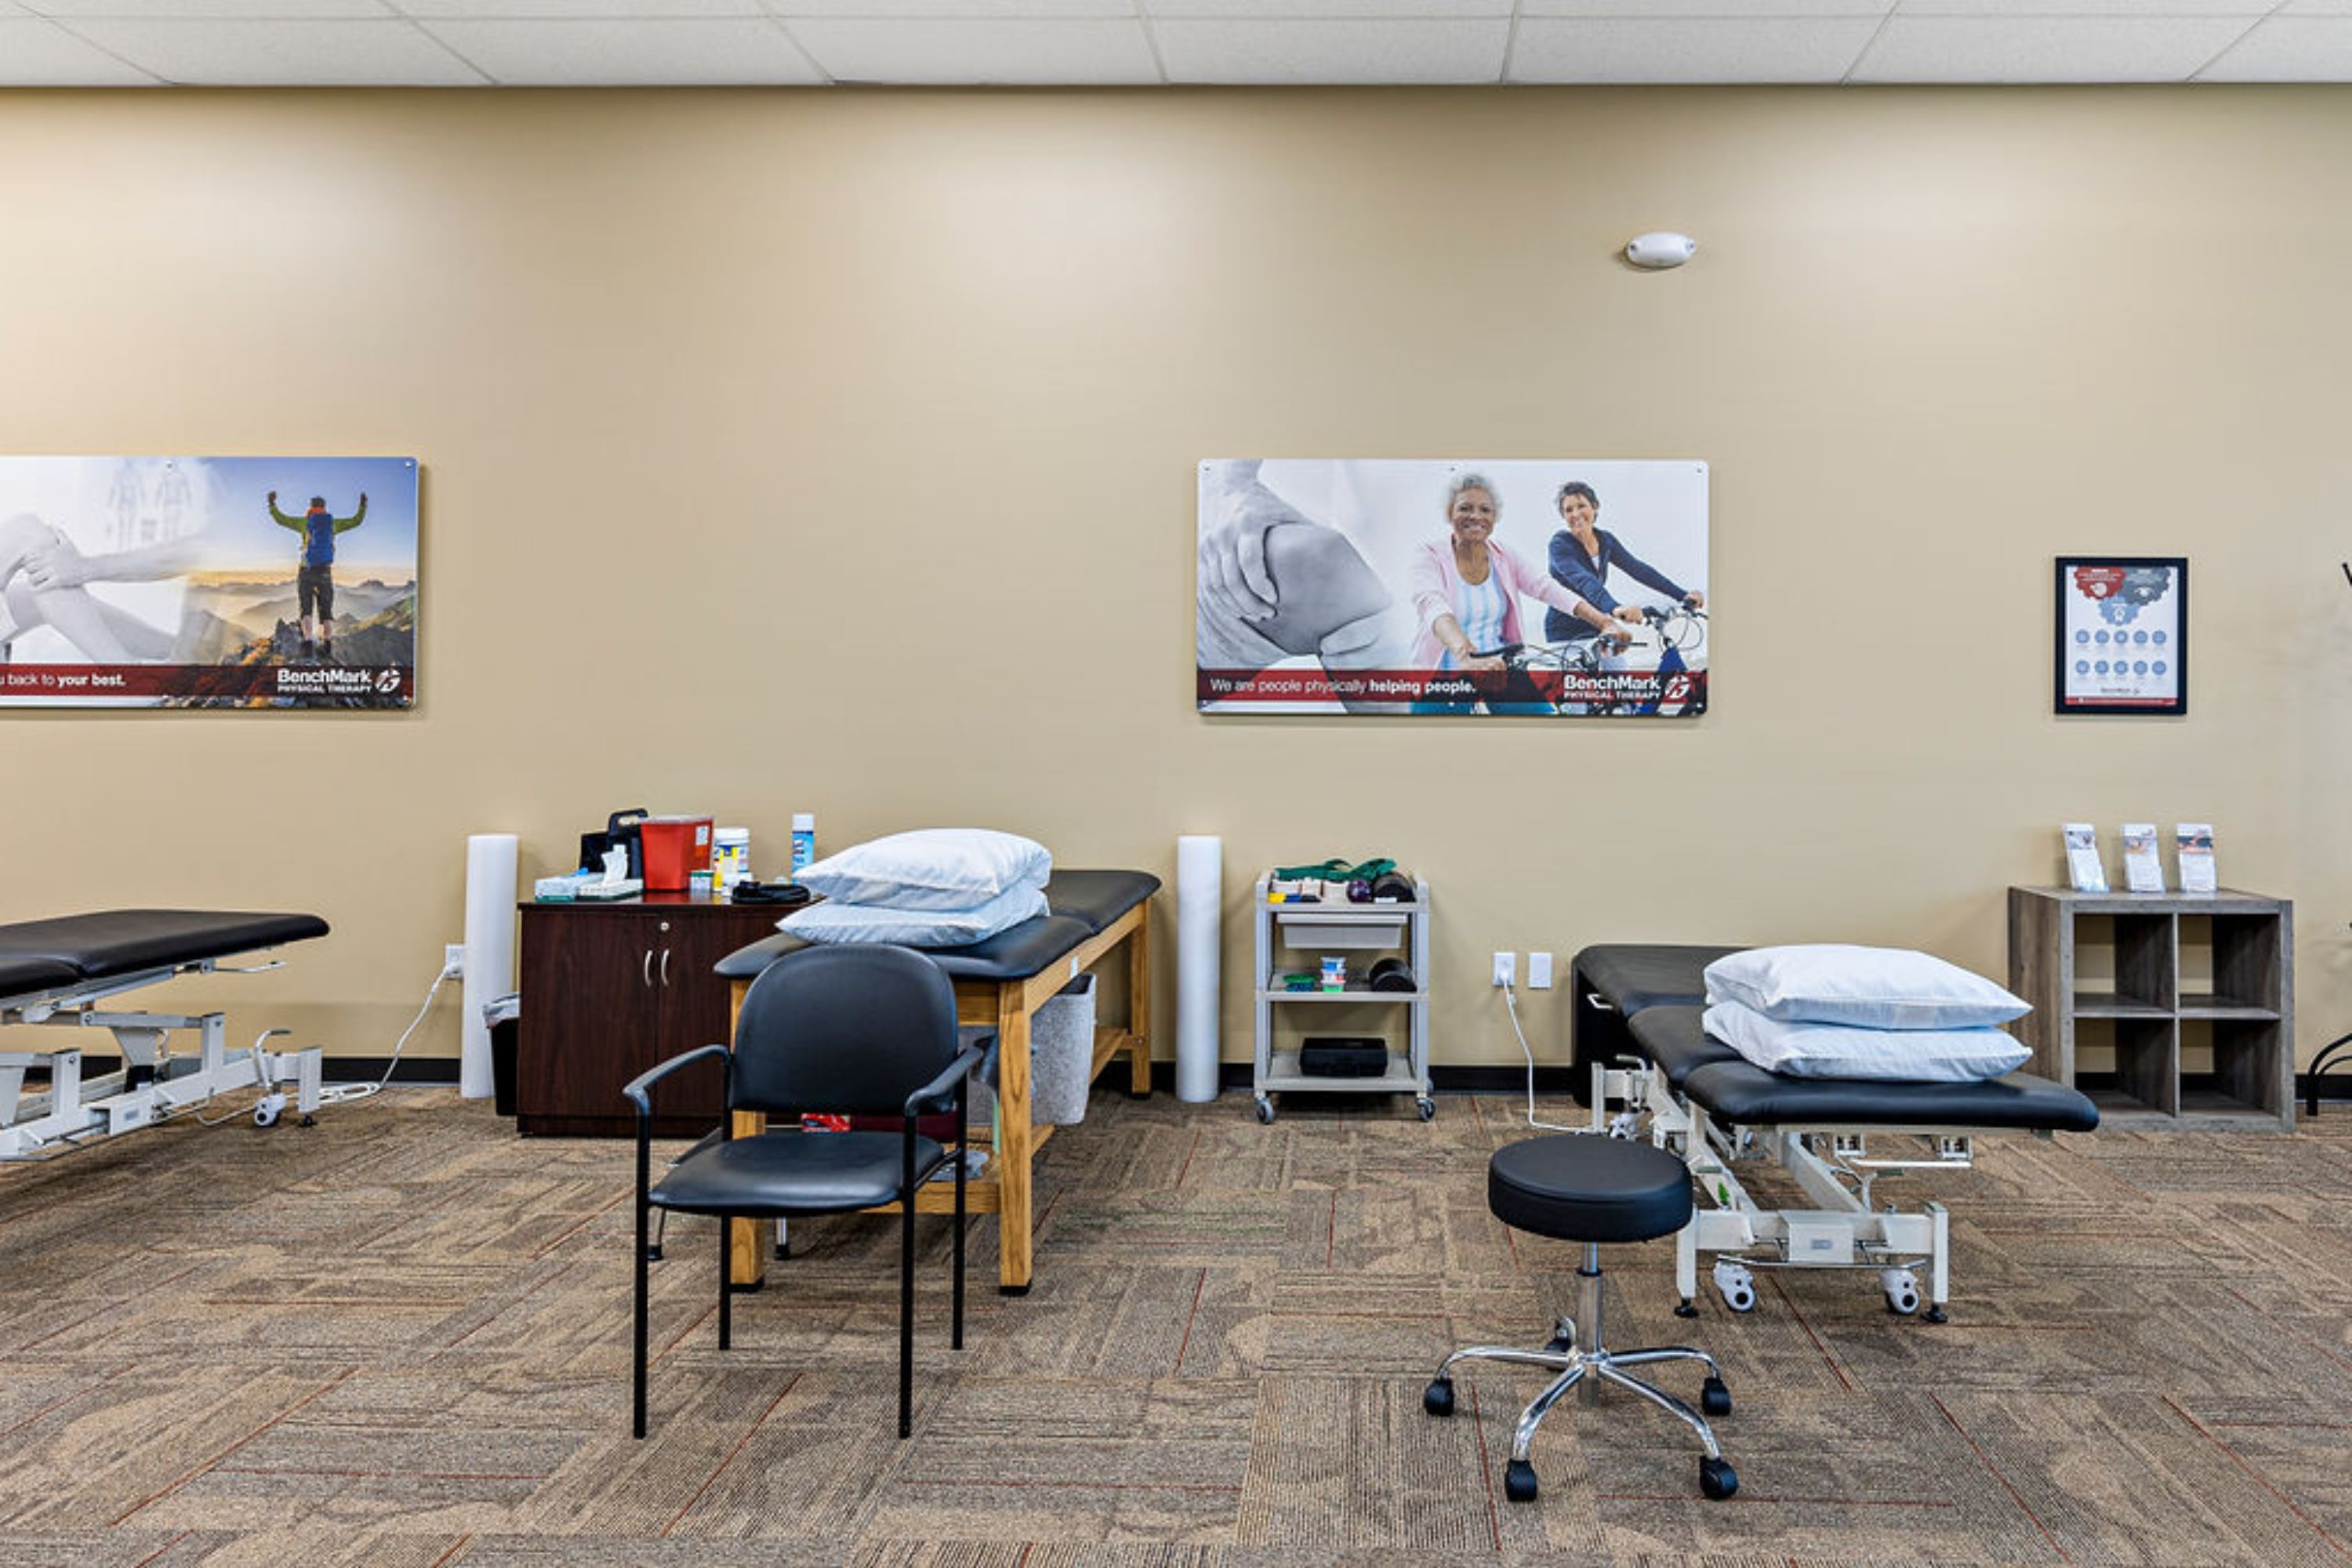 Image 2 | BenchMark Physical Therapy